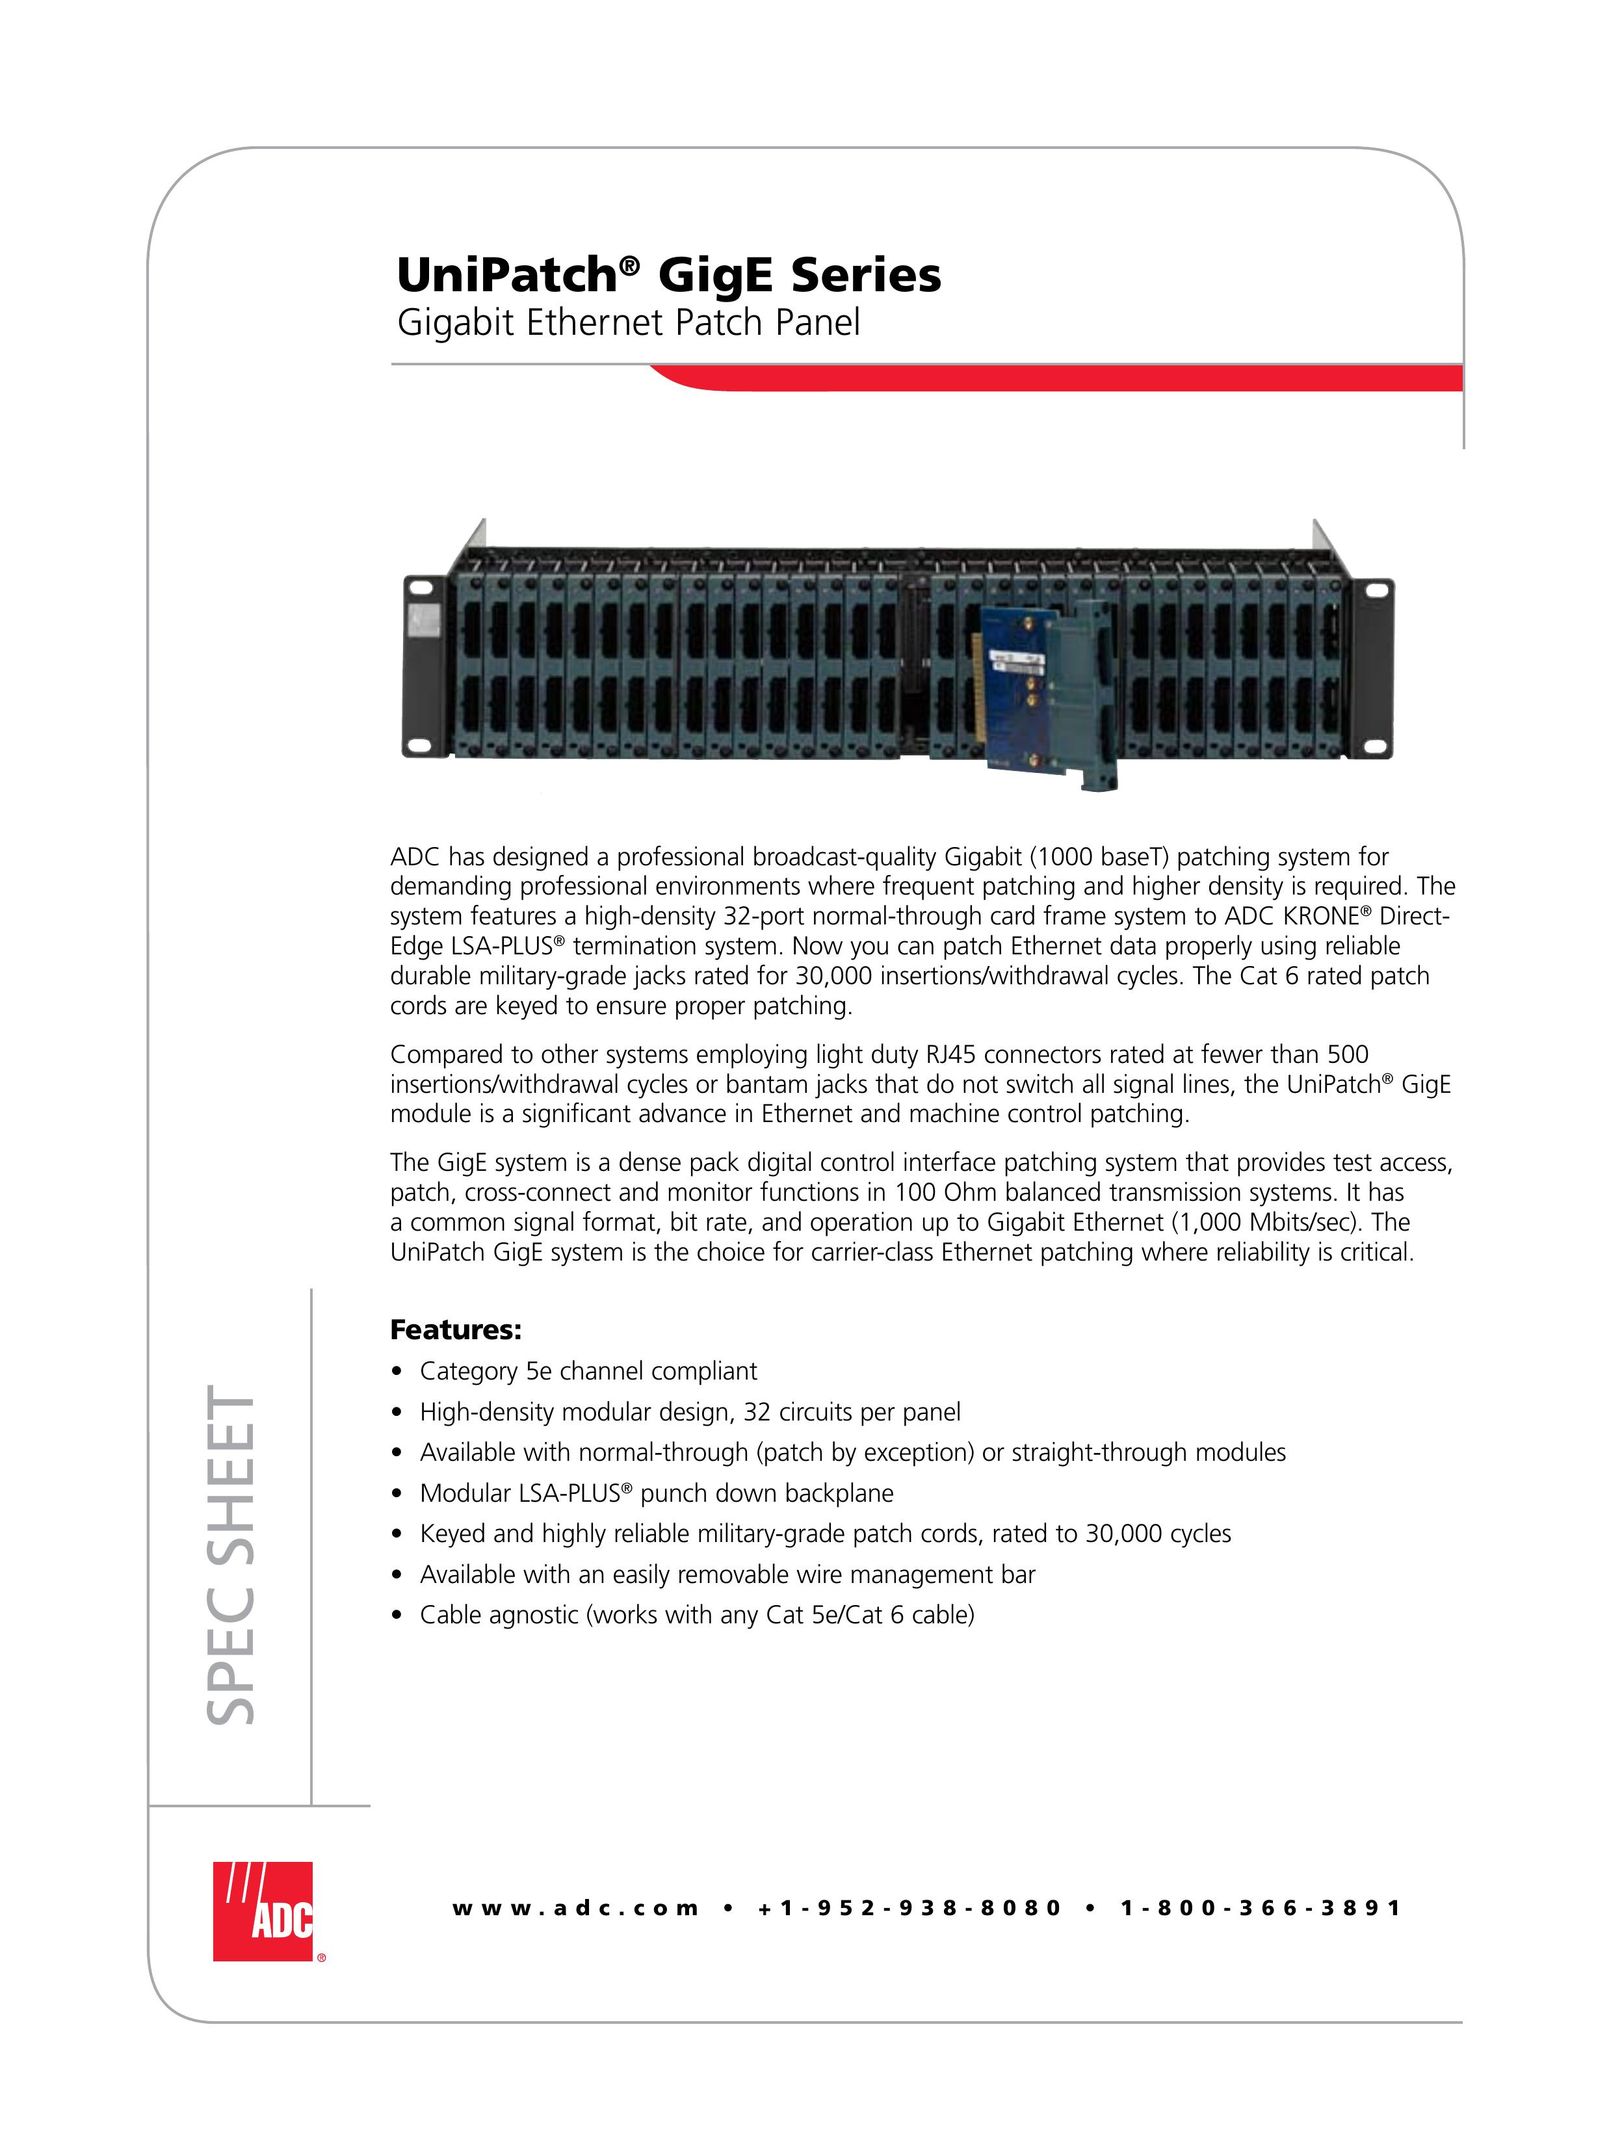 ADC GigE Series Network Card User Manual